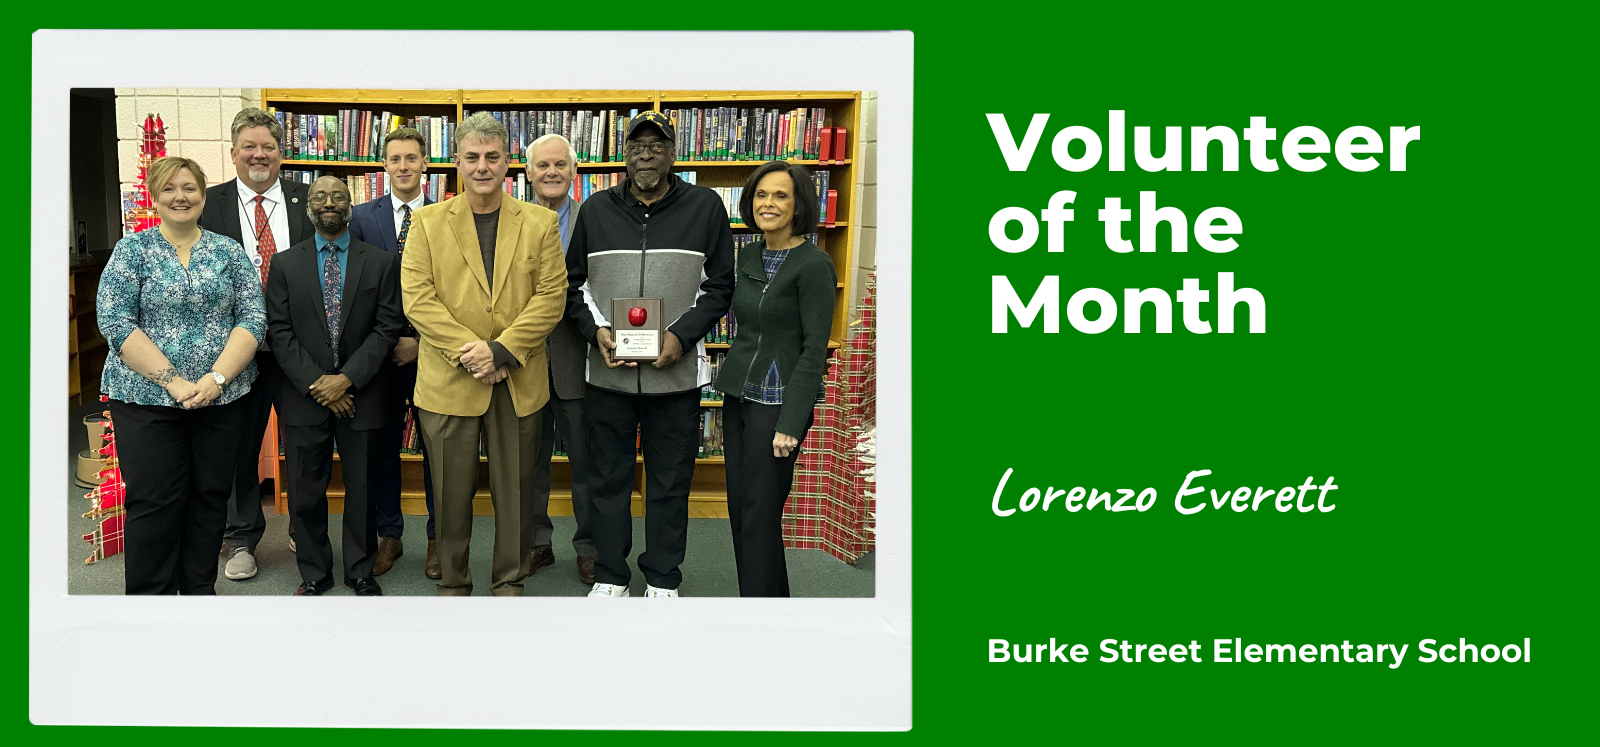 image of volunteer of the month recipient lorenzo everett standing with board members, superintendent, and principal